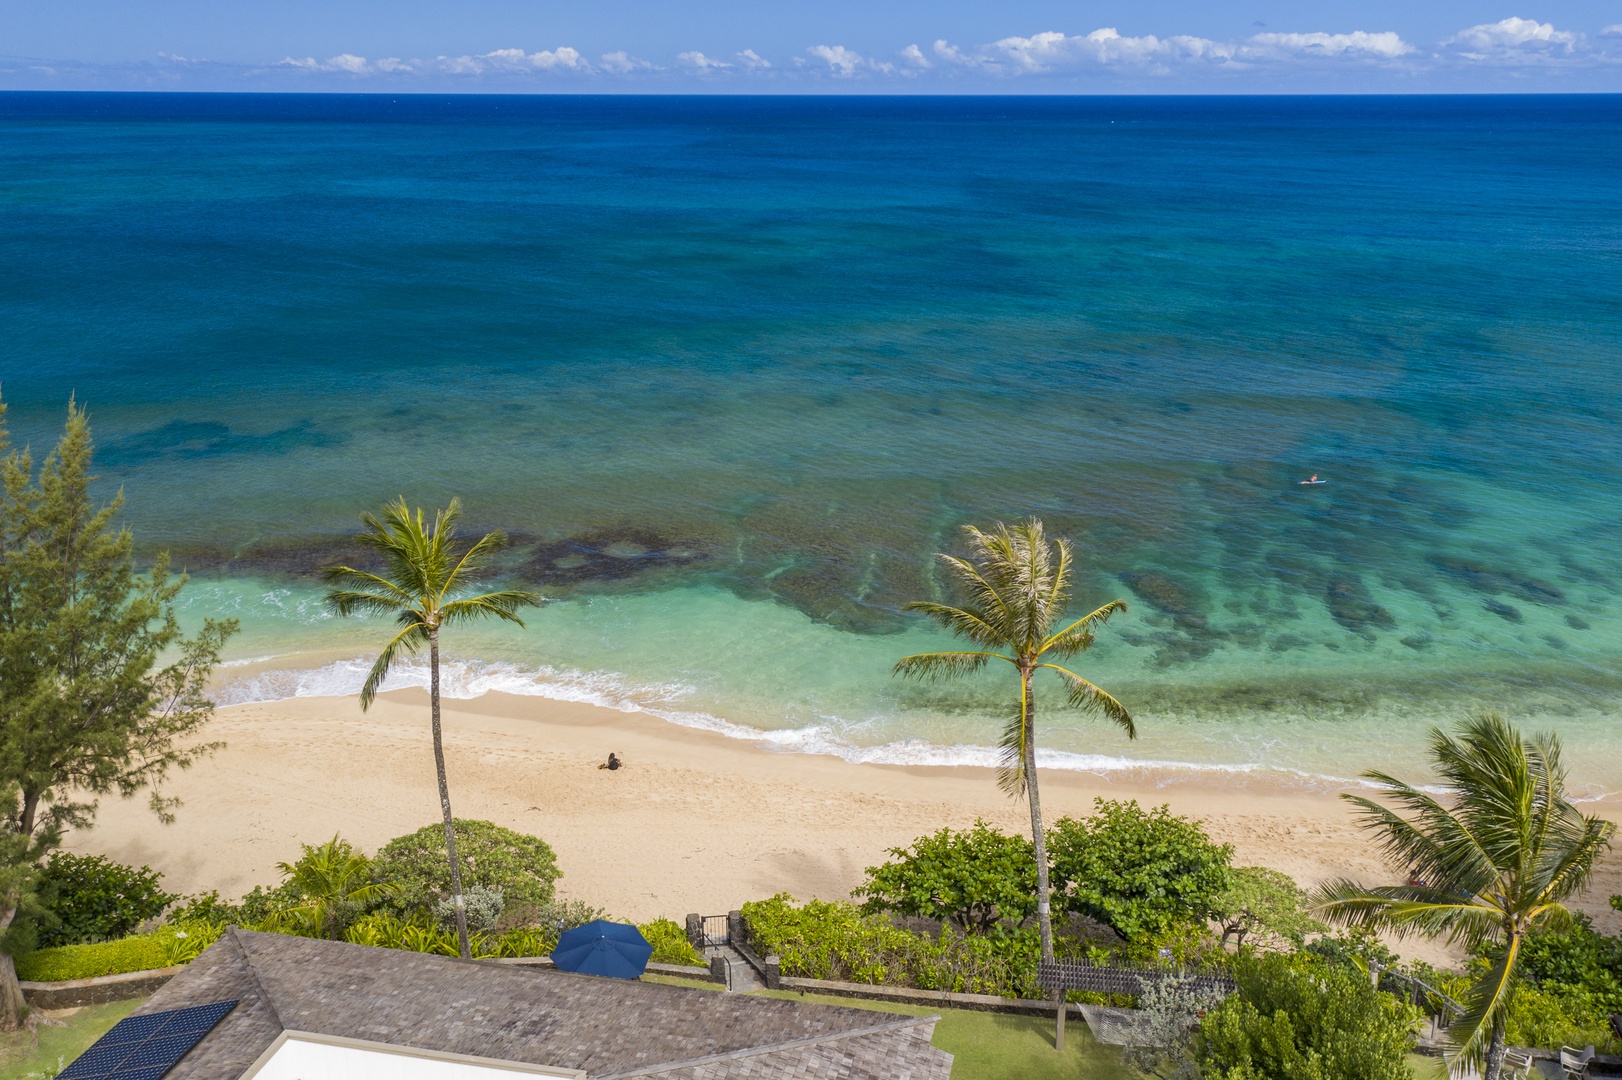 Haleiwa Vacation Rentals, Hale Kimo - Steps to the beach from your private backyard.